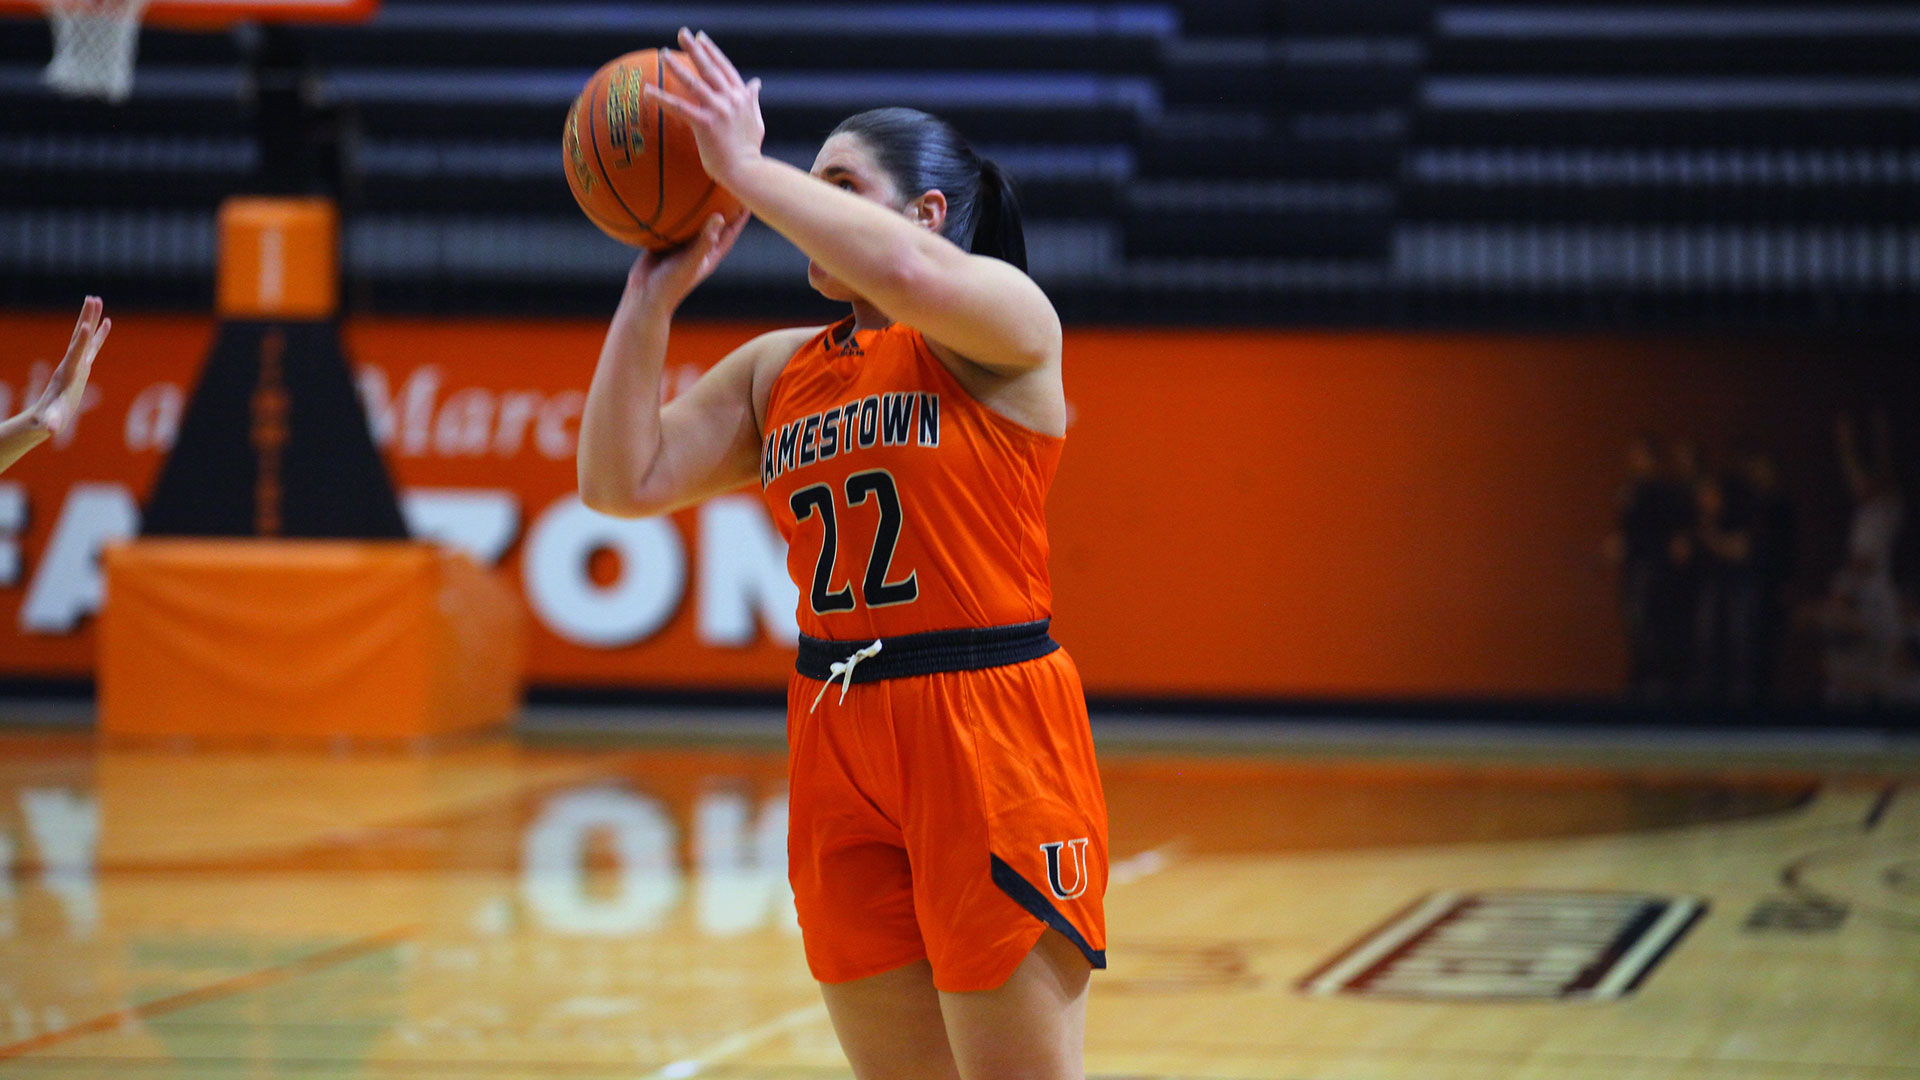 Sarah Lenz led UJ with 16 points in a win over VCSU Friday / Photo by Sydney Lewellen